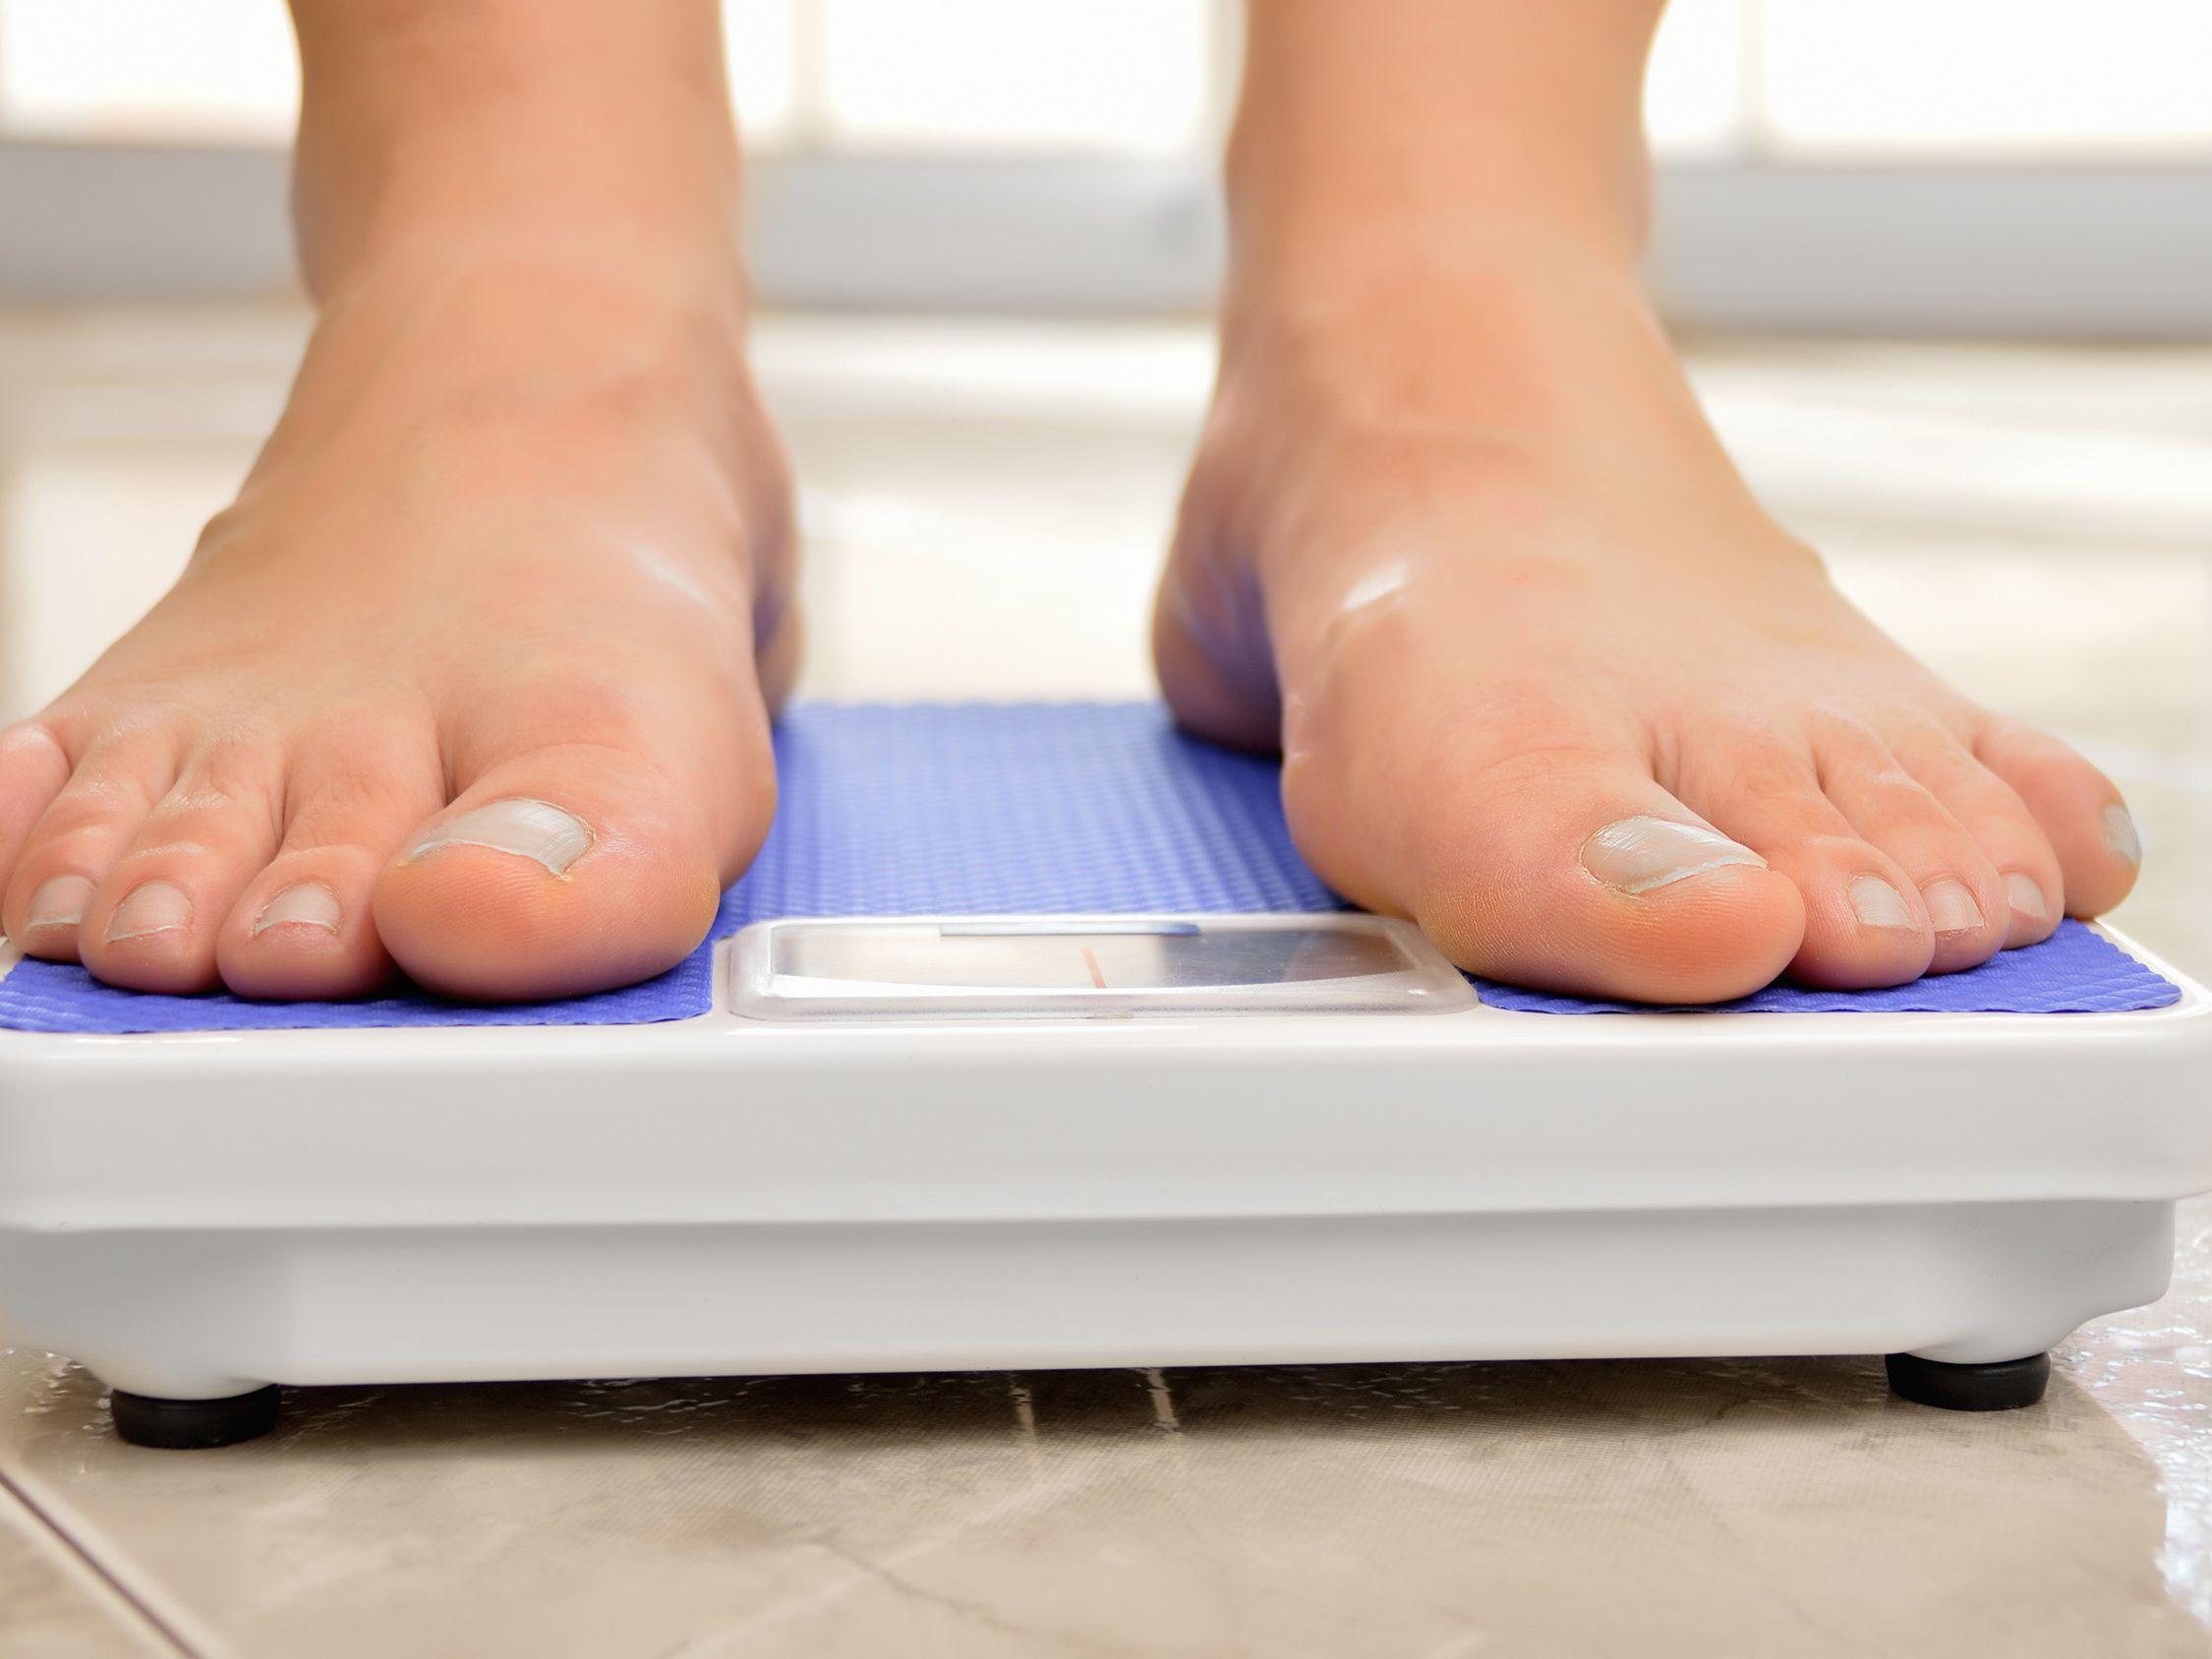 Controlling Your Weight Makes You A Better Healthier.